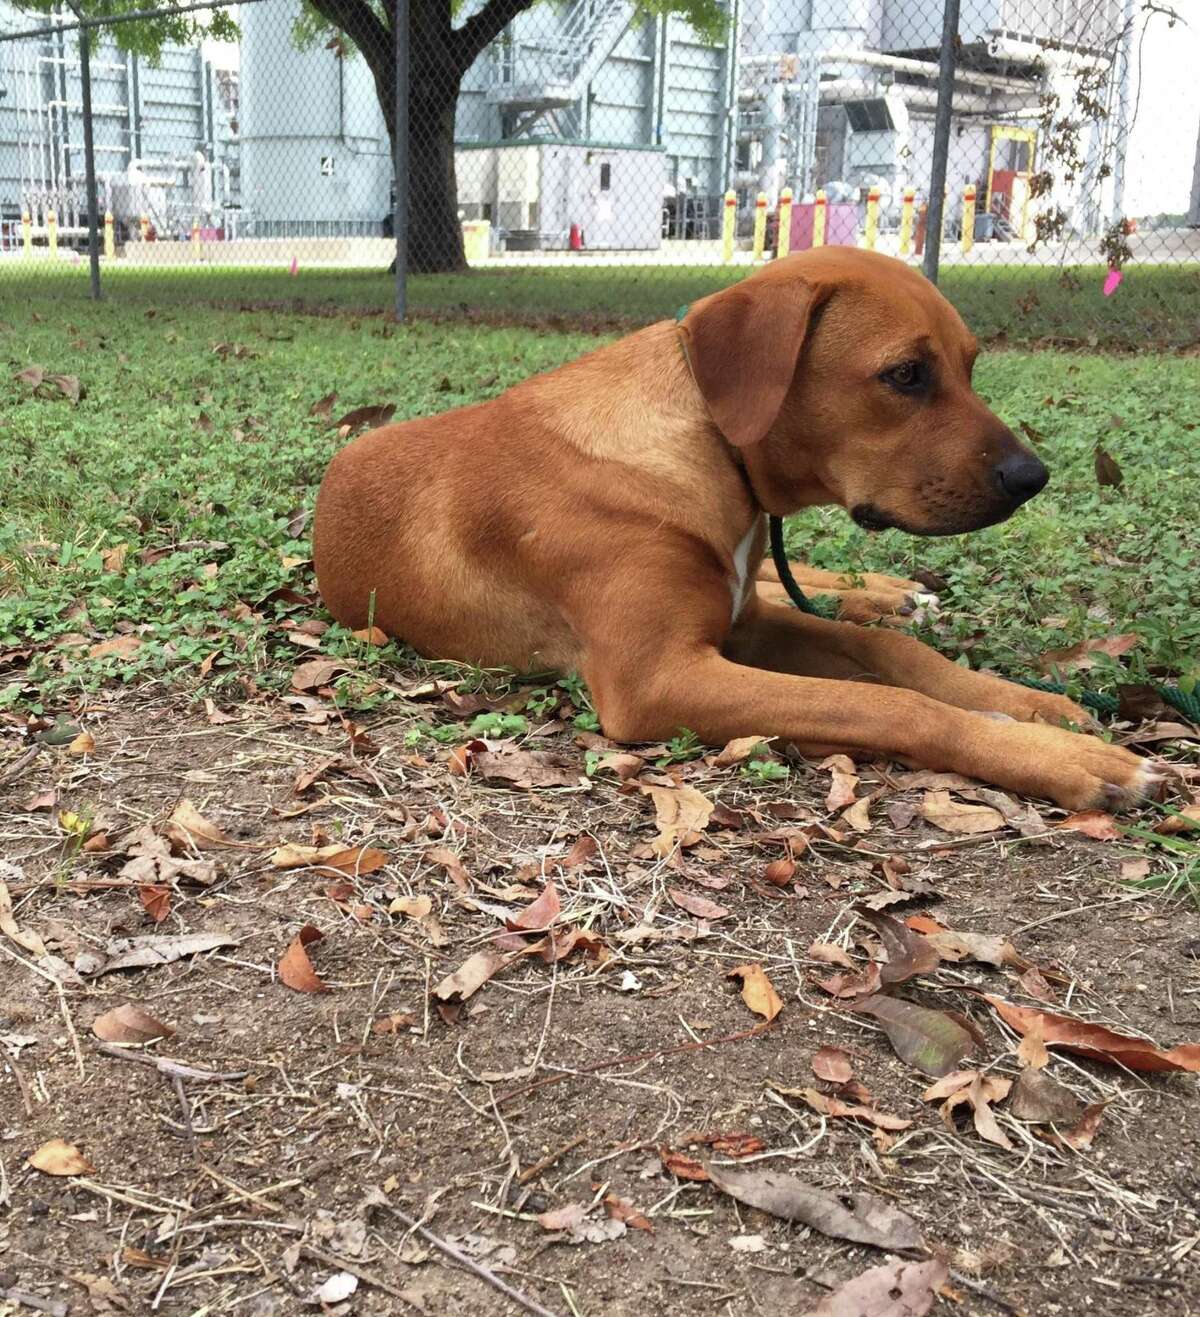 Princess Leona, a female, Rhodesian Ridgeback mix, found at the Leon Creek CPS Energy power plant was rescued by the company's nonprofit, Worthwhile Animal Rescue Mission. In January, a family in Northeast Texas adopted her.